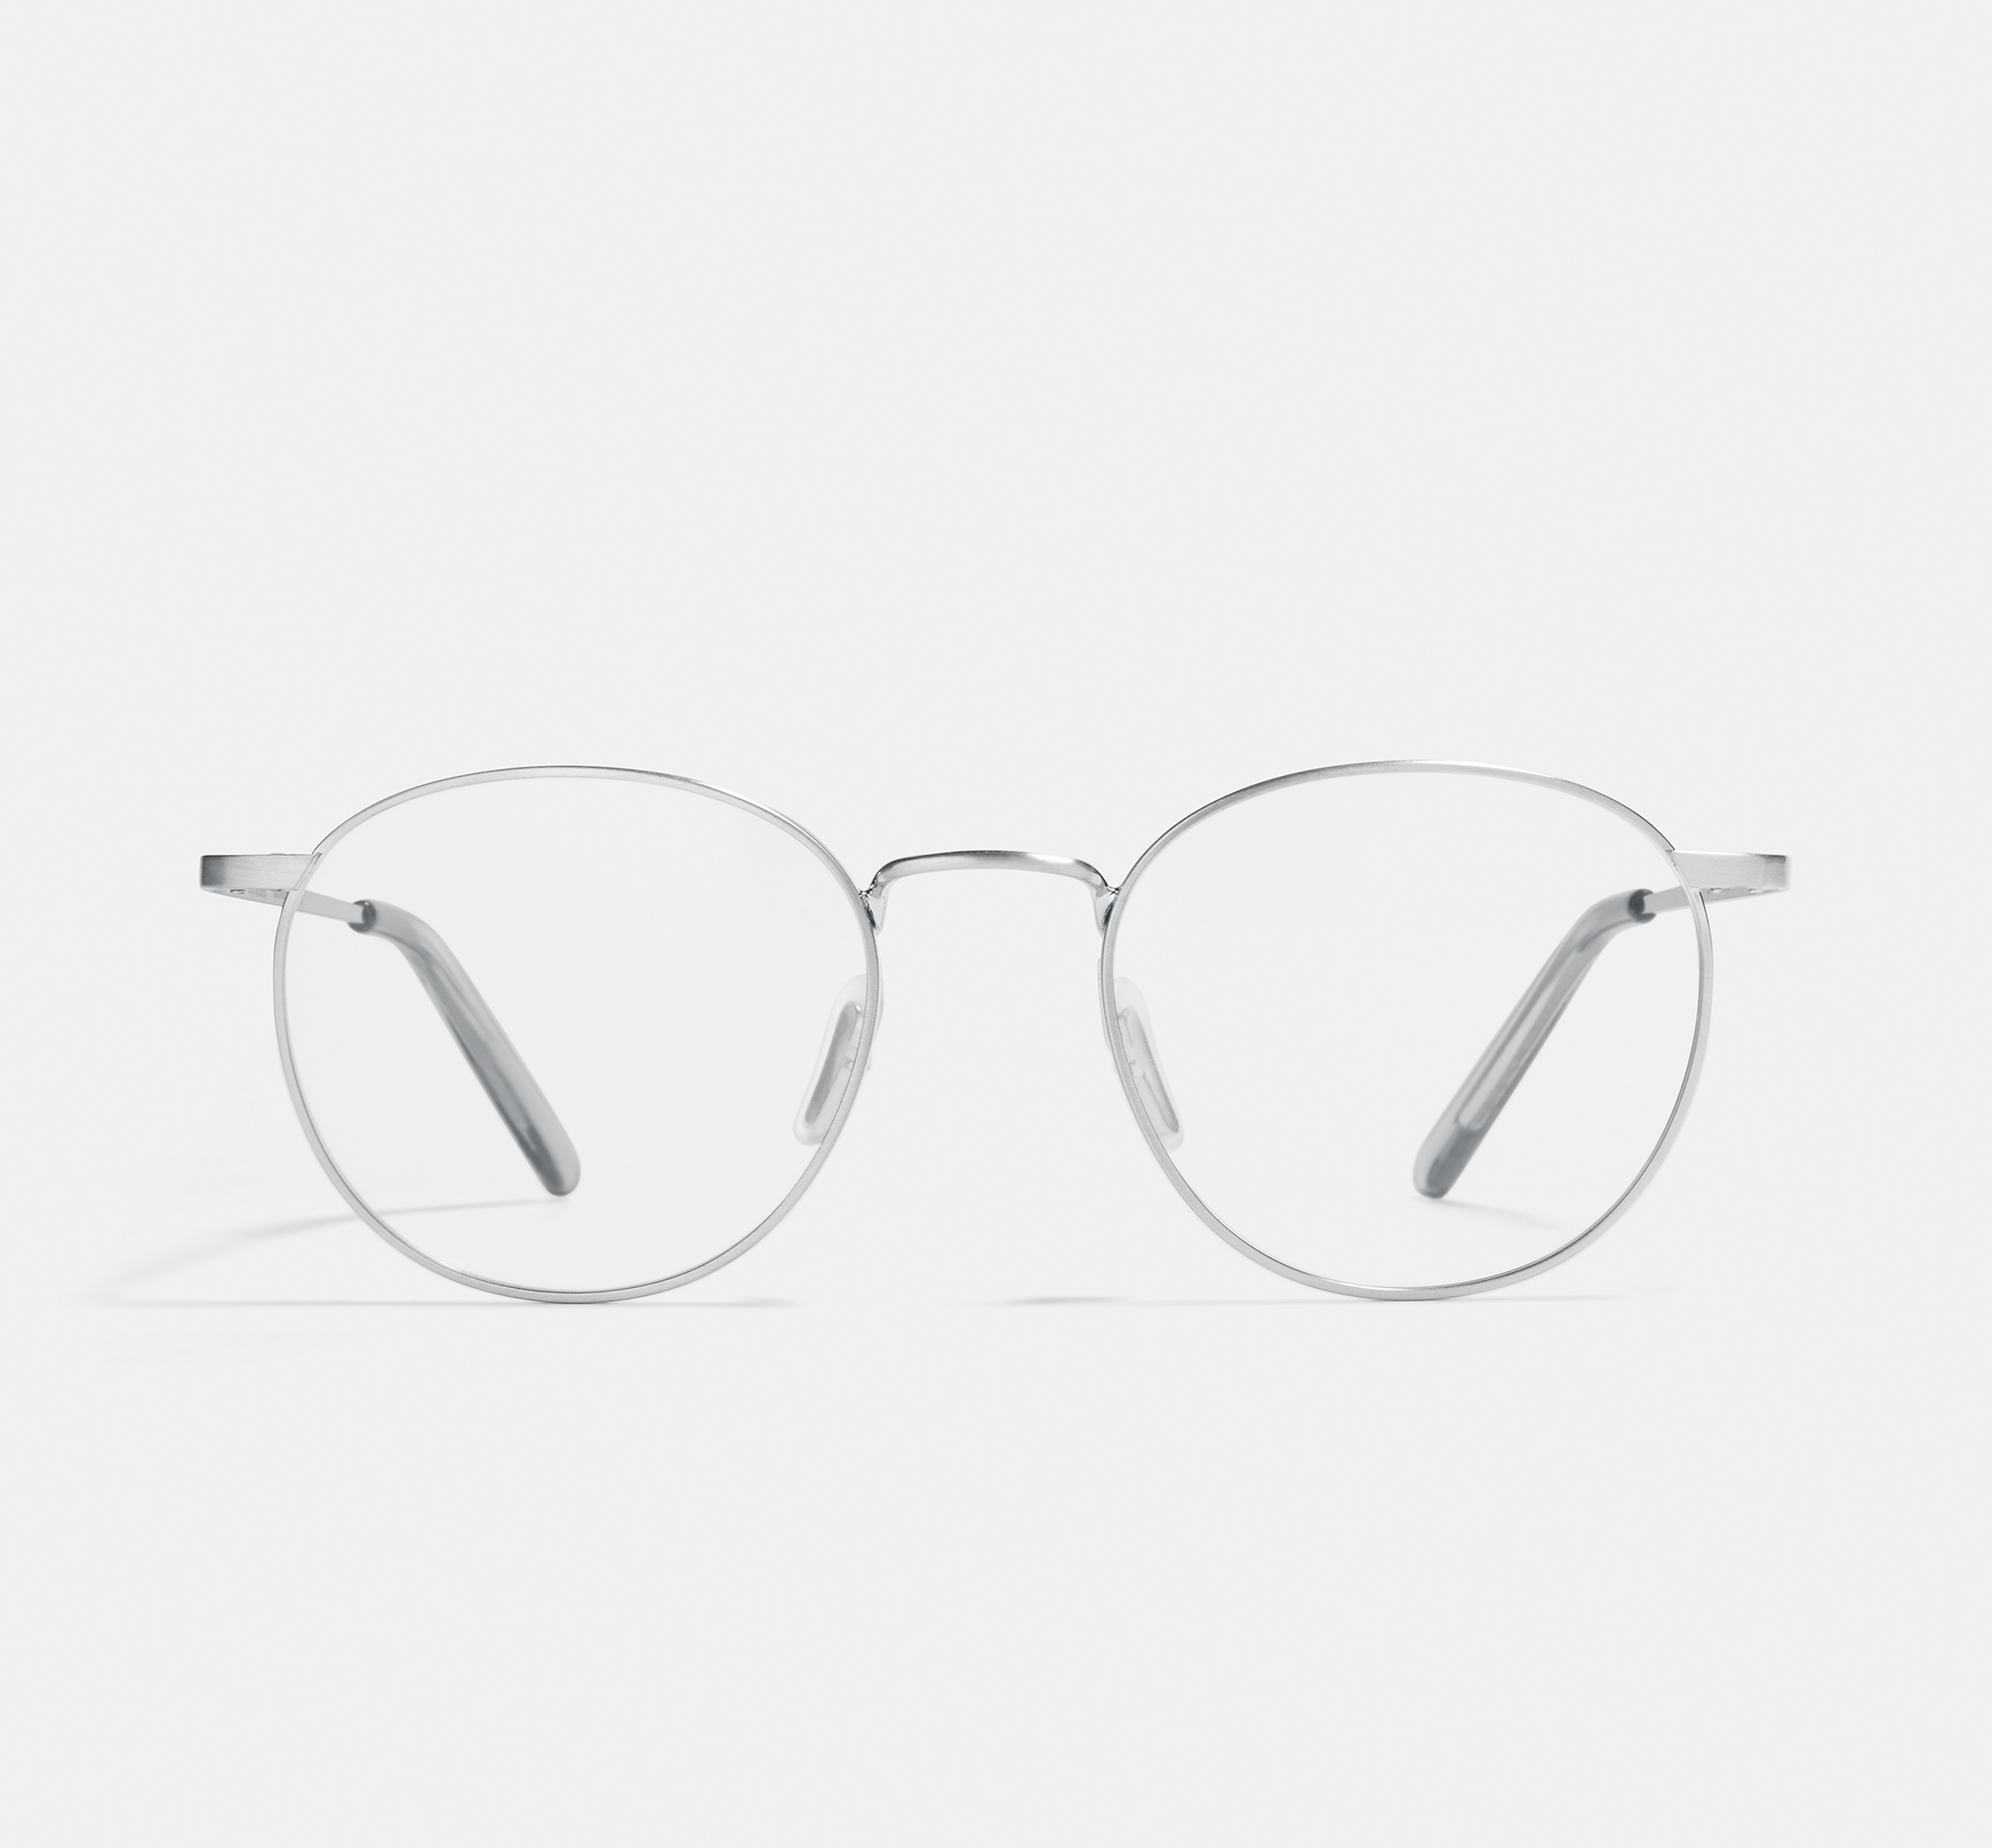 Neil Satin Silver | Round Metal Glasses | Ace & Tate